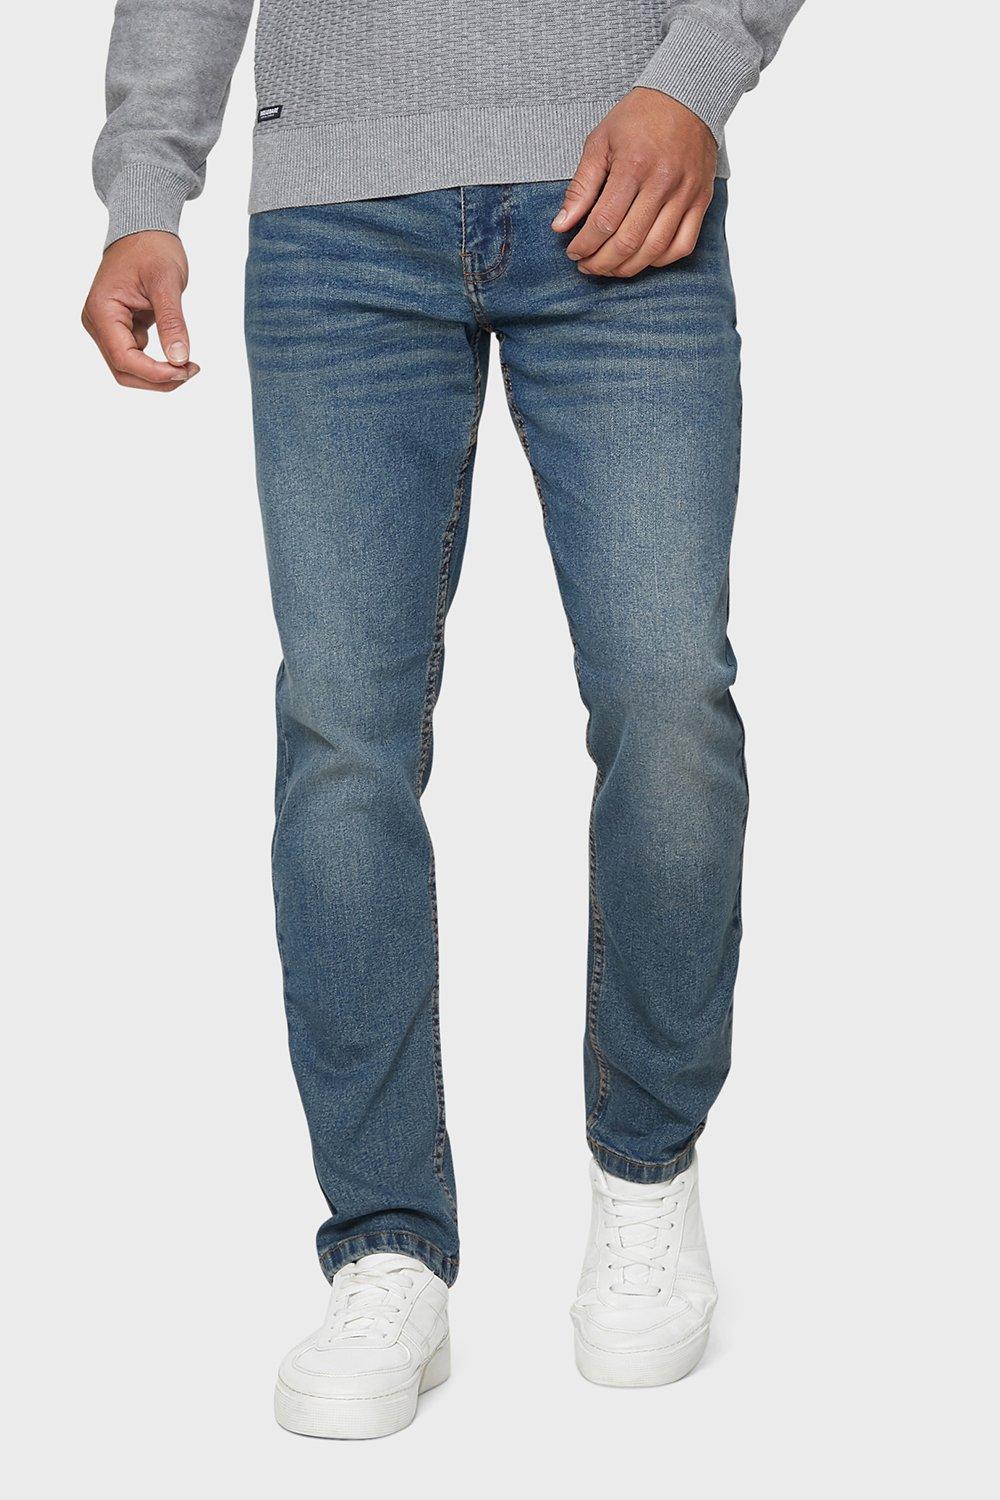 Jeans | Dirty Wash 'Formby' Slim Fit Jeans | Threadbare